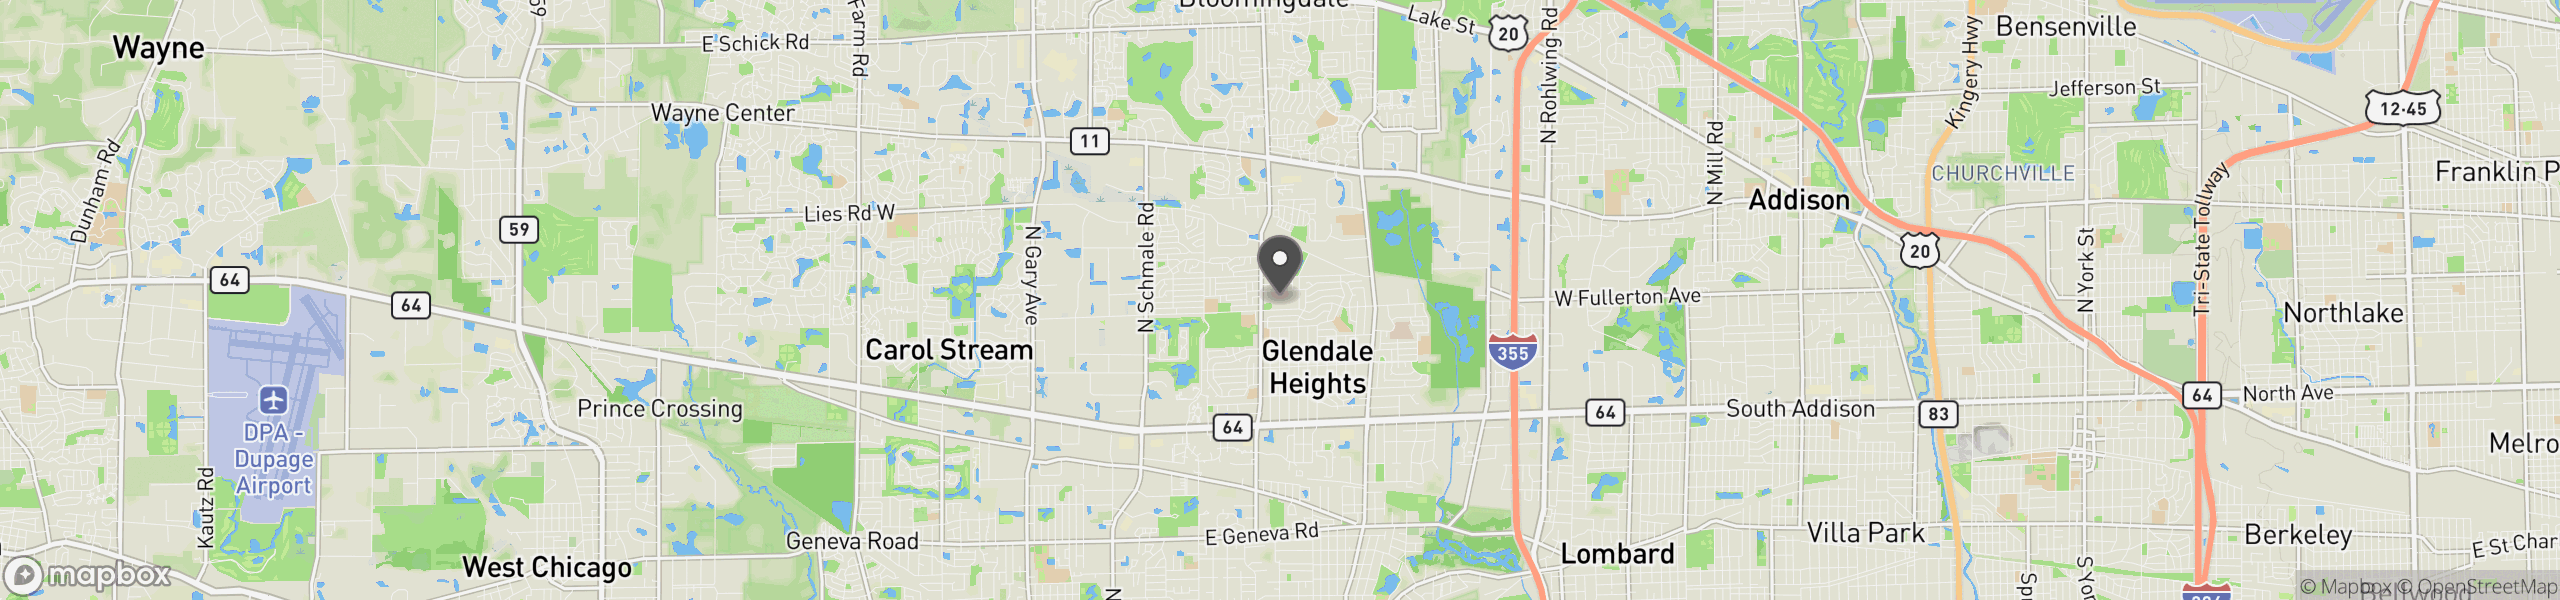 Glendale Heights, IL 60139